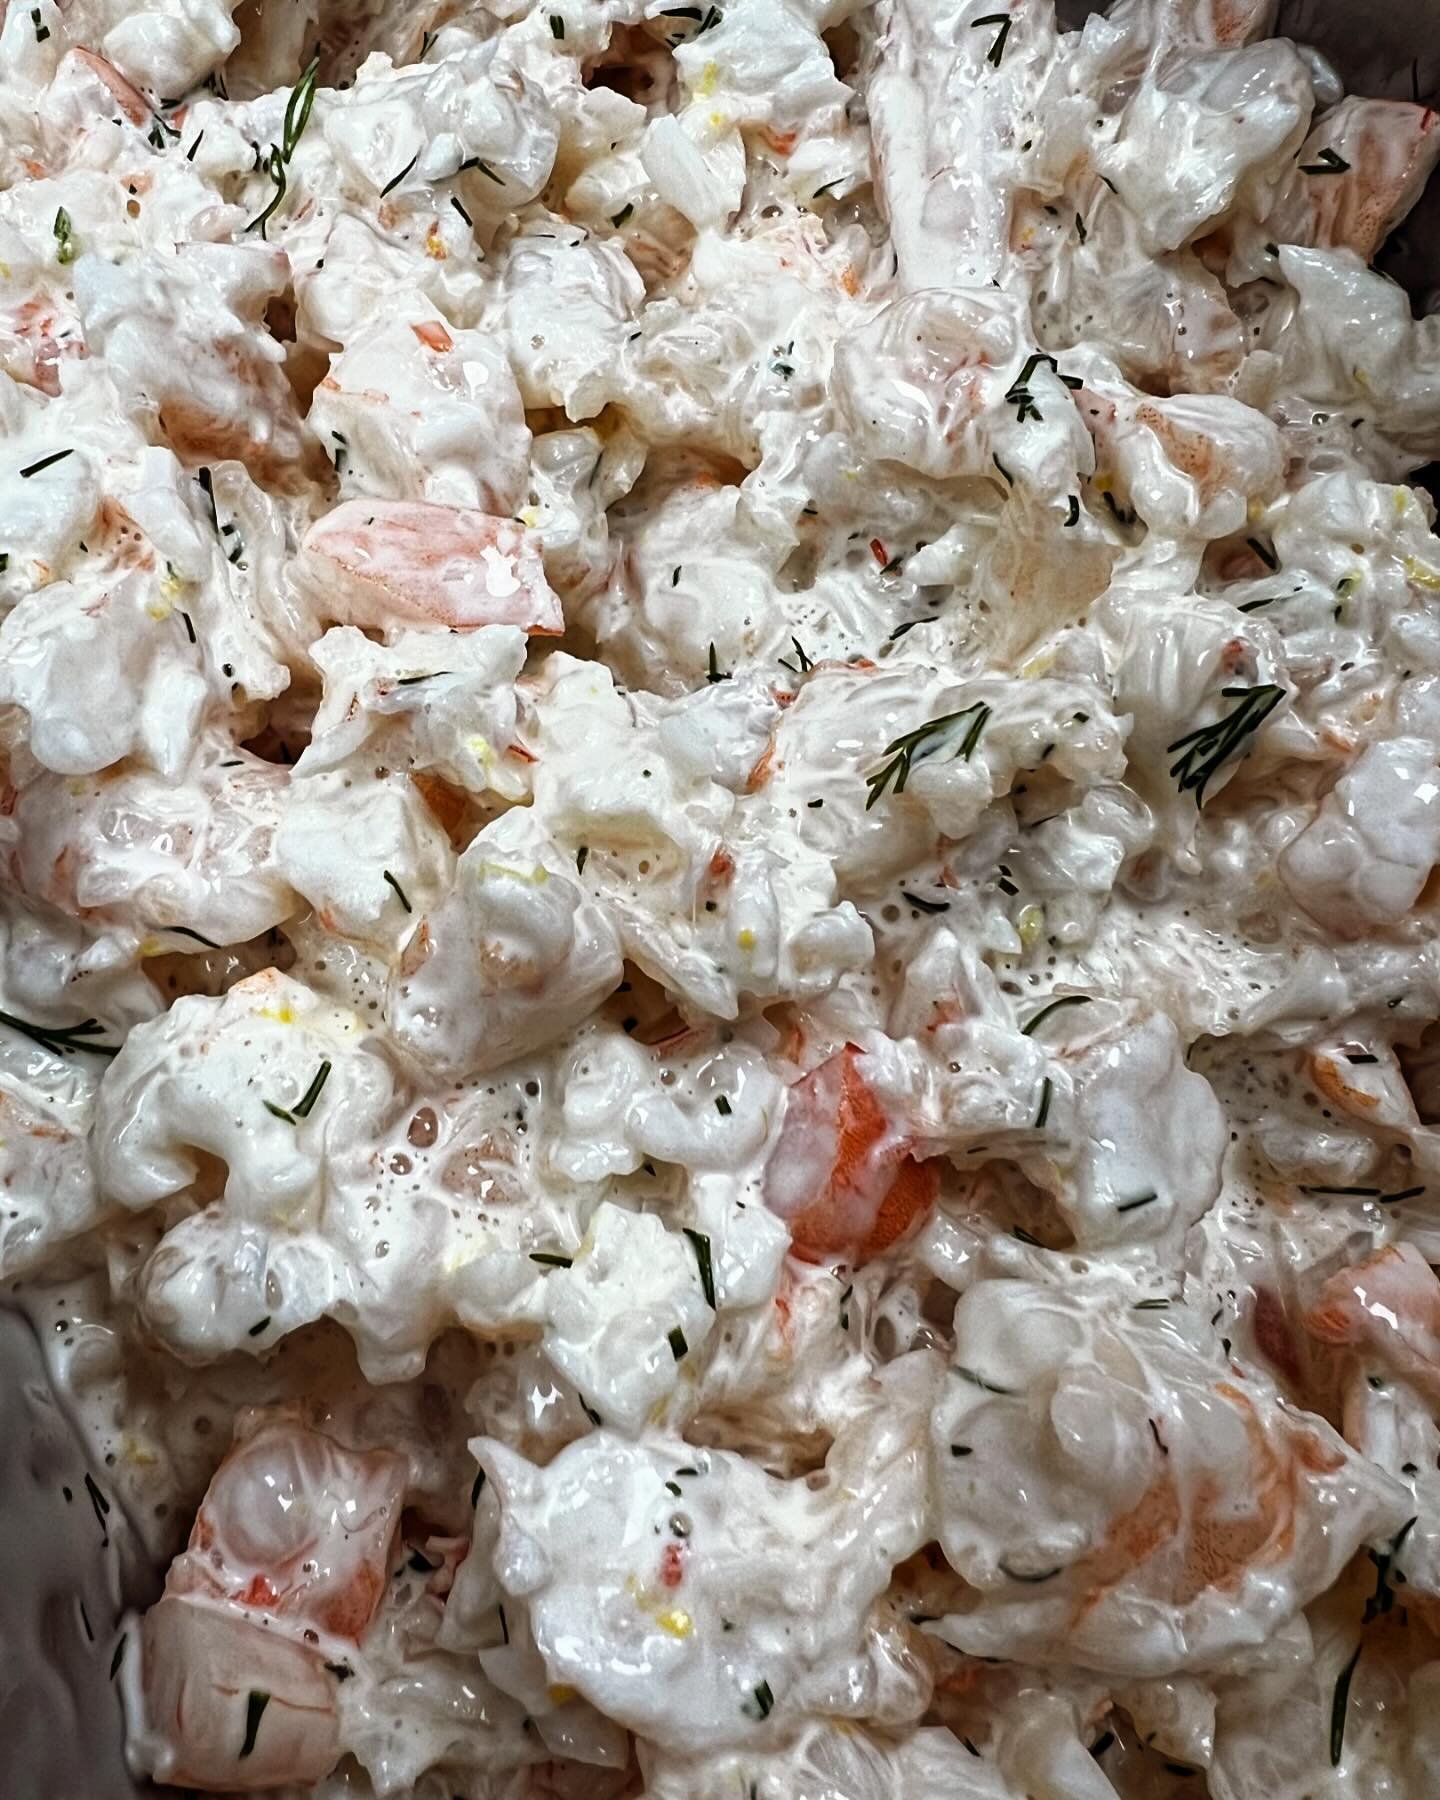 GUYS!  It&rsquo;s our preview to summer - we&rsquo;re not quite ready for lobster rolls but we ARE doing some shrimp rolls tomorrow because it&rsquo;s apparently going to be sunny AND warm! 

We poach shrimp, chop it up and add dill, lemon zest, salt